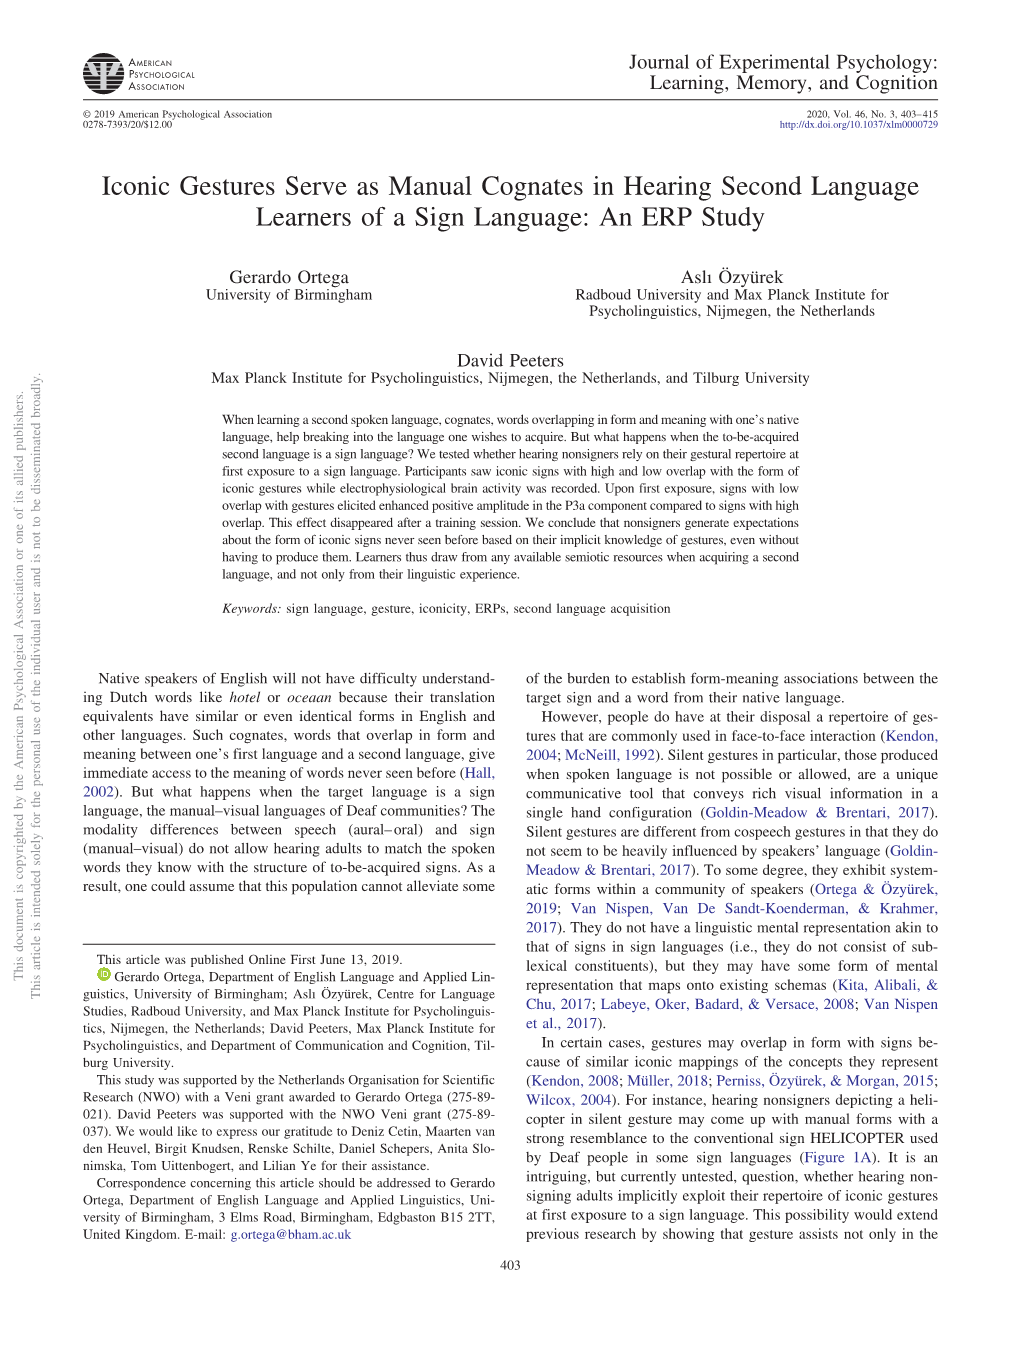 Iconic Gestures Serve As Manual Cognates in Hearing Second Language Learners of a Sign Language: an ERP Study